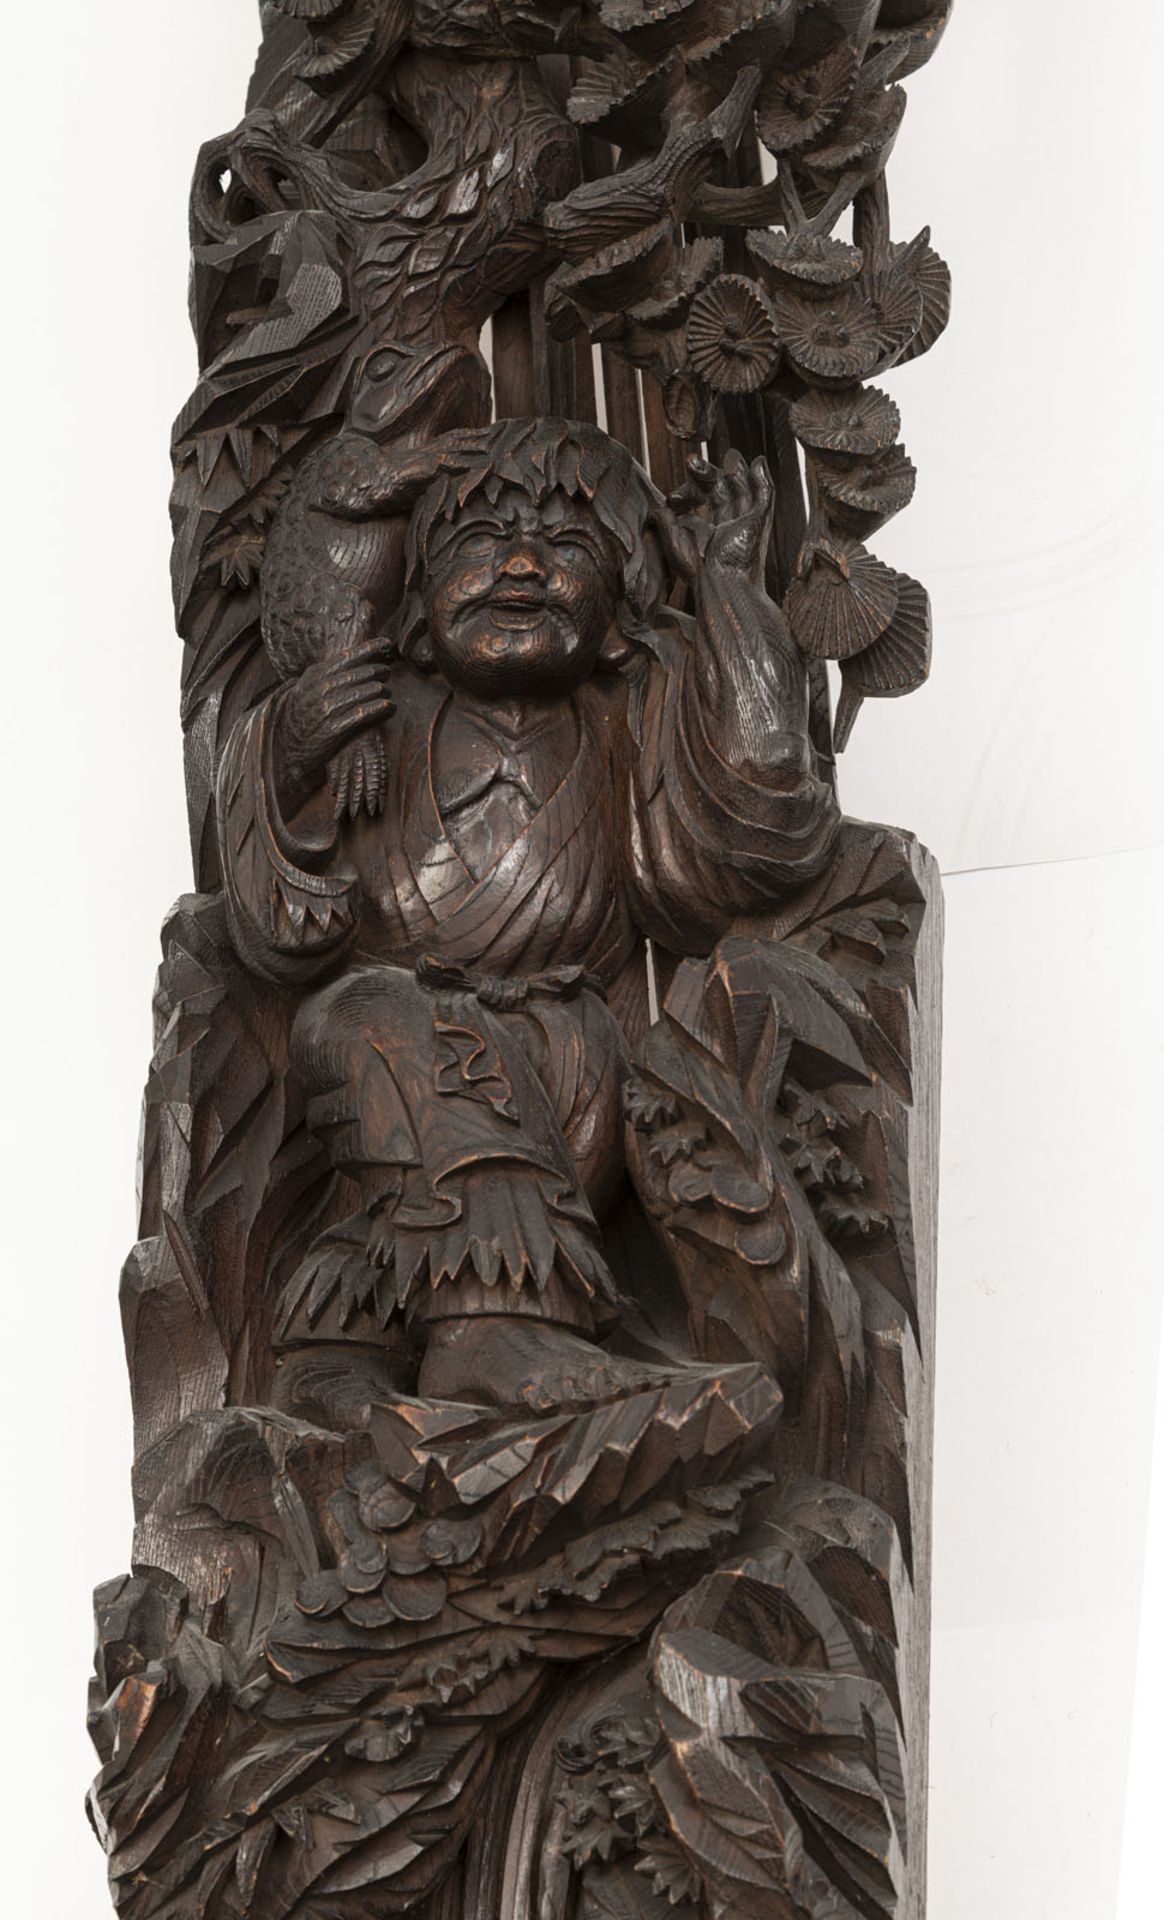 A RELIEF CARVED WOOD ARCHWAY DEPICTING DRAGONS AND FIGURES - Image 2 of 4